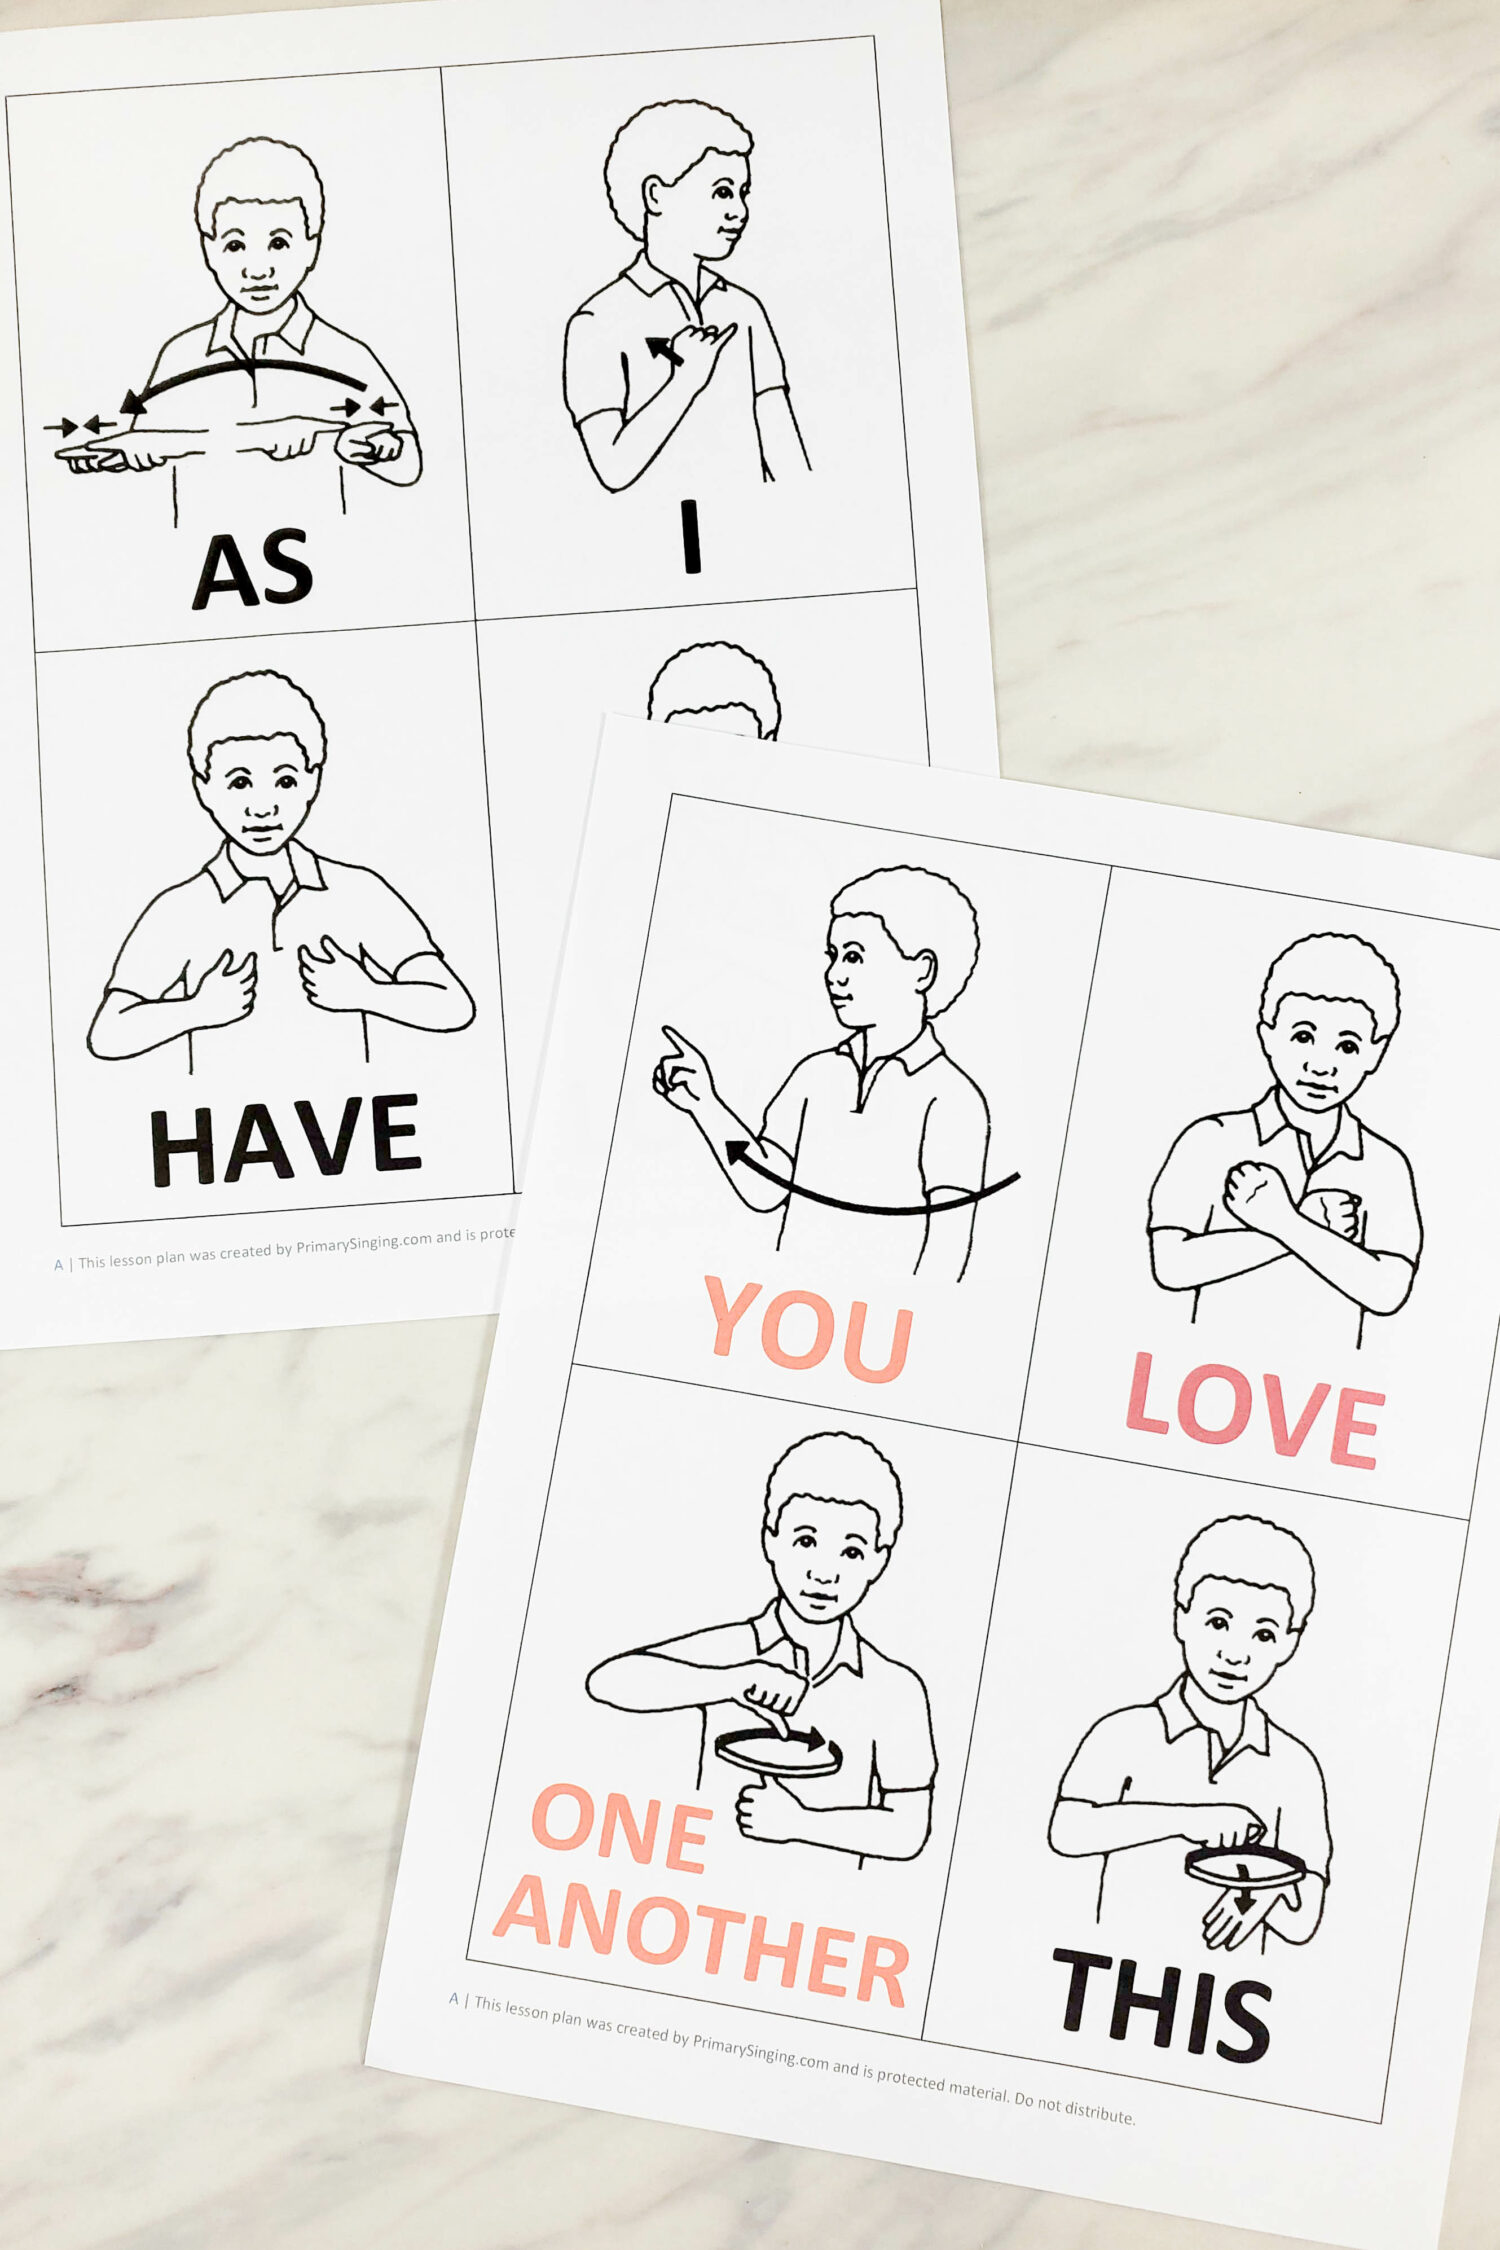 Love One Another ASL Sign language cards - fun and easy singing time idea for LDS Primary music leaders to teach this song with signs to add movement and meaning to the lyrics. Plus lots of fun ideas to mix up this activity in a new way so it feels fresh and different.